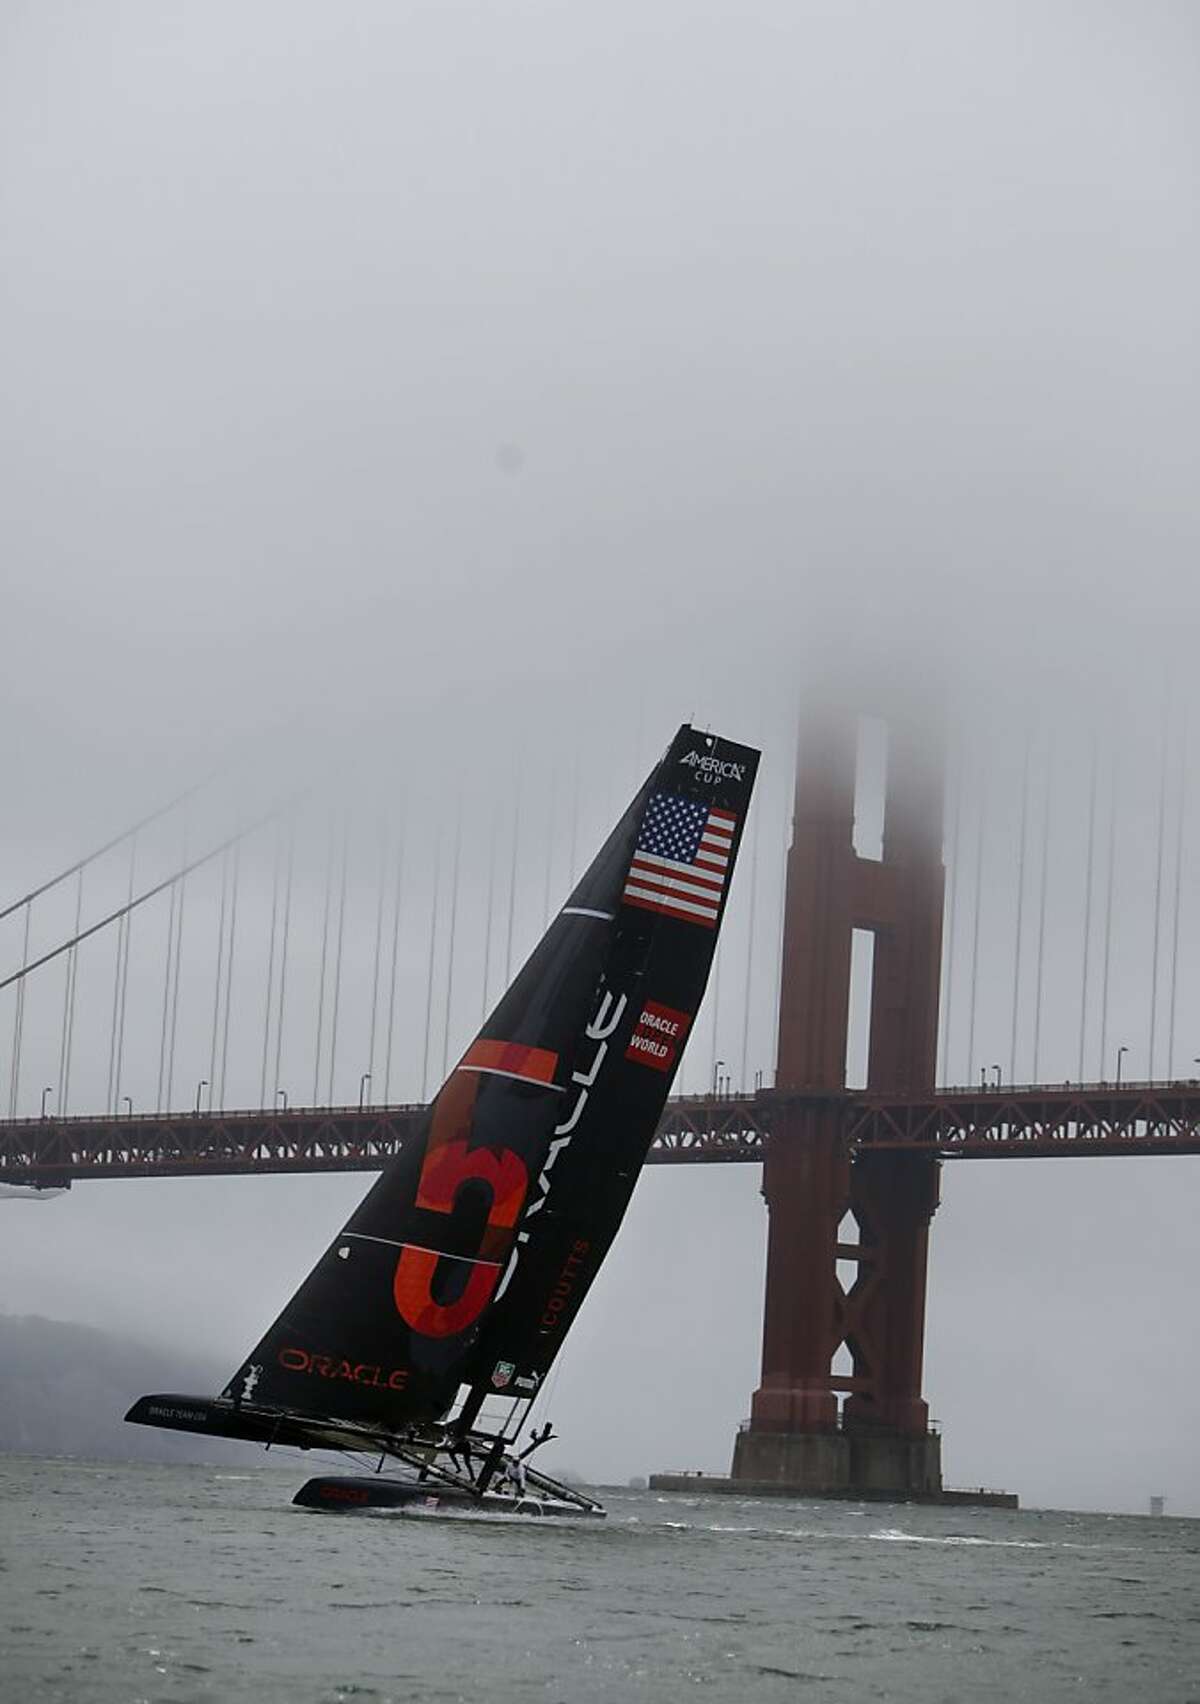 Team Oracle USA Coutts sails next to the Golden Gate Bridge before the start of the Match Racing Qualifiers for the America's Cup World Series on Wednesday, August 22, 2012 in San Francisco, Calif. Team Oracle USA Coutts did not race on Wednesday.